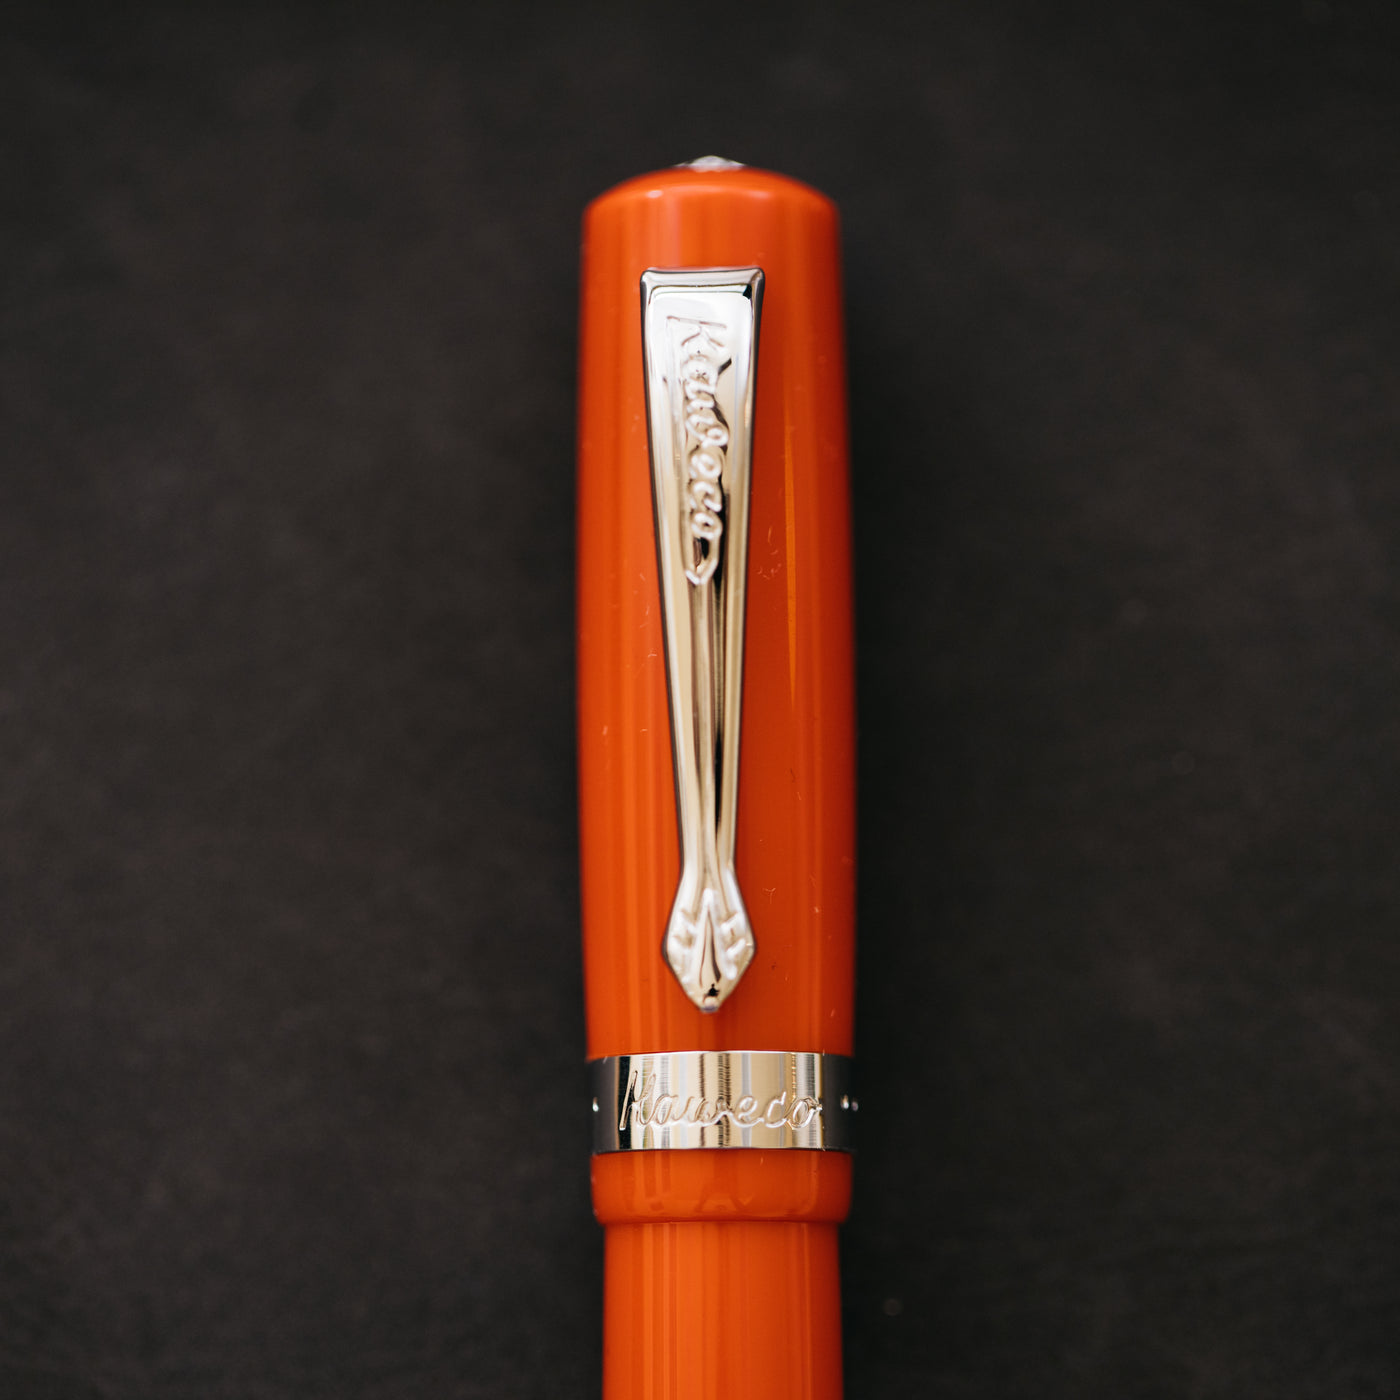 Kaweco Student Red Fountain Pen